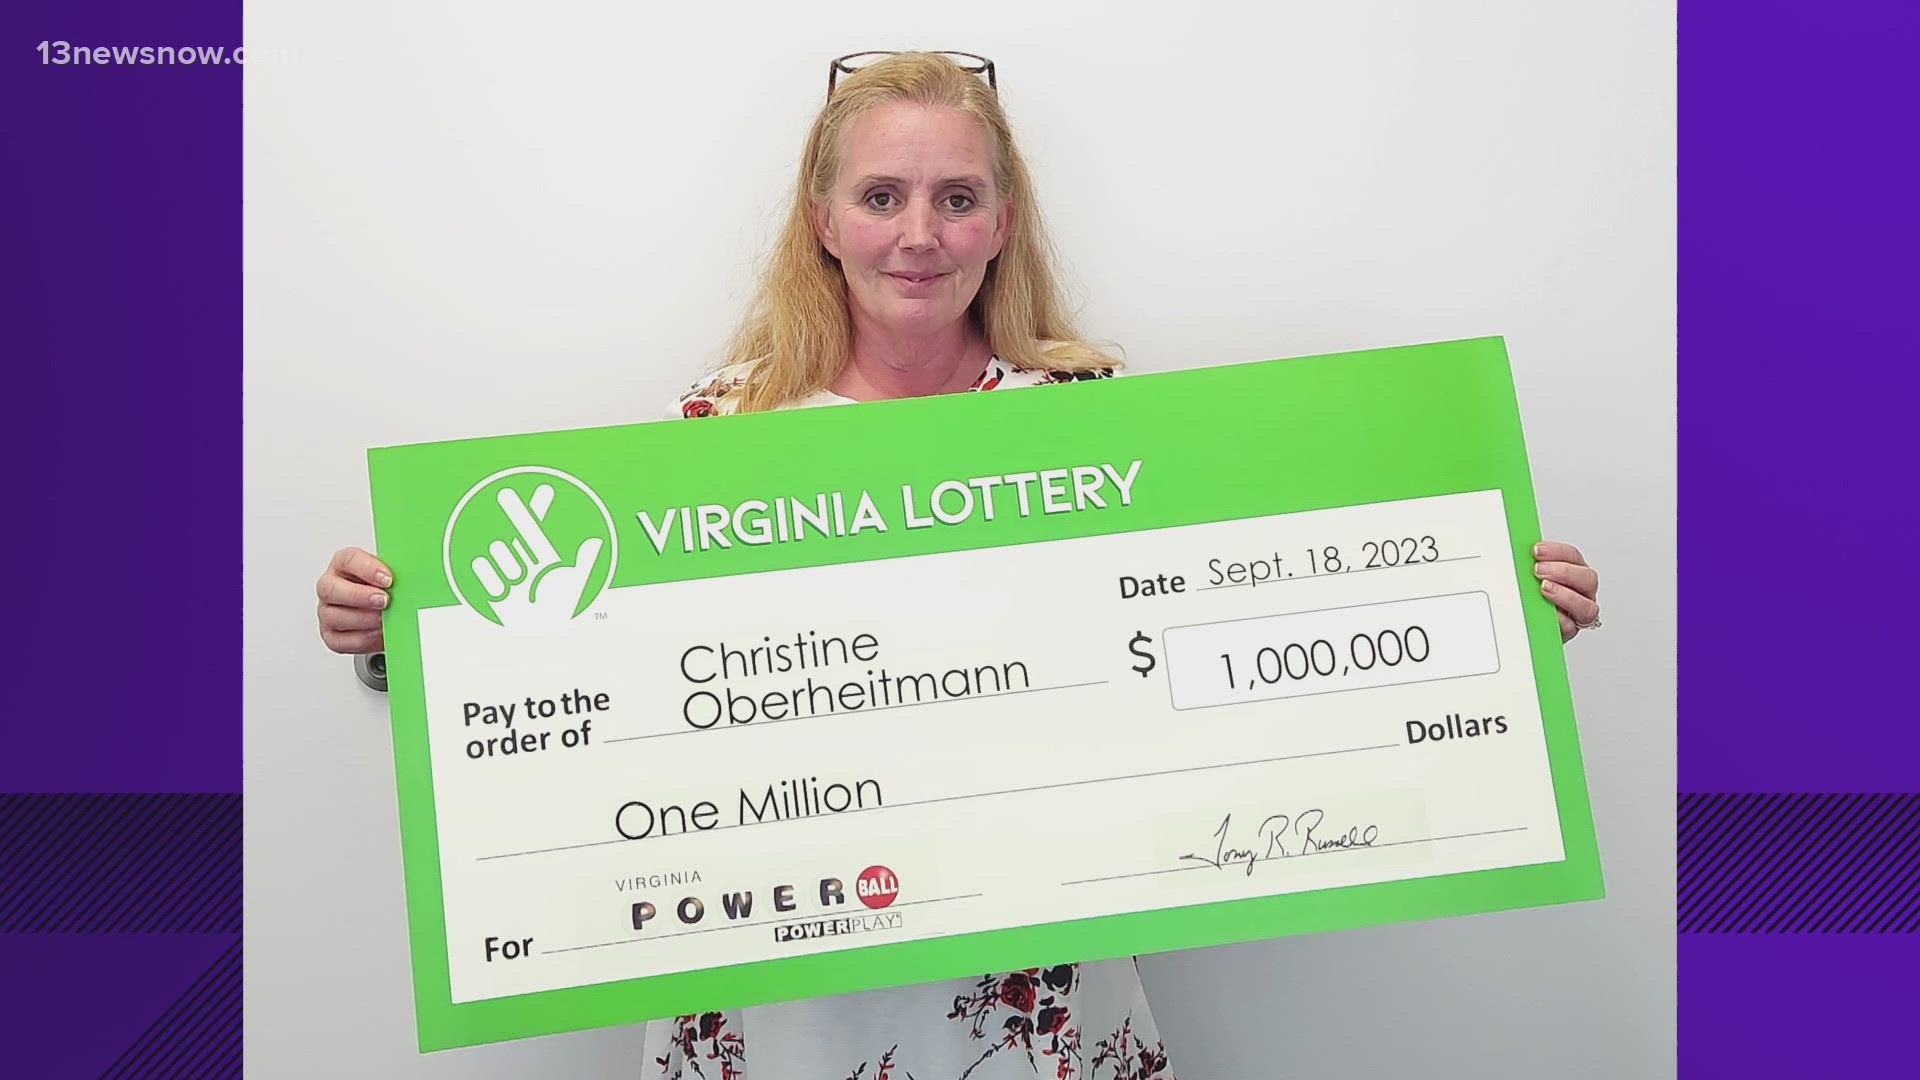 There's a brand new millionaire thanks to a Powerball ticket purchase on the Eastern Shore!